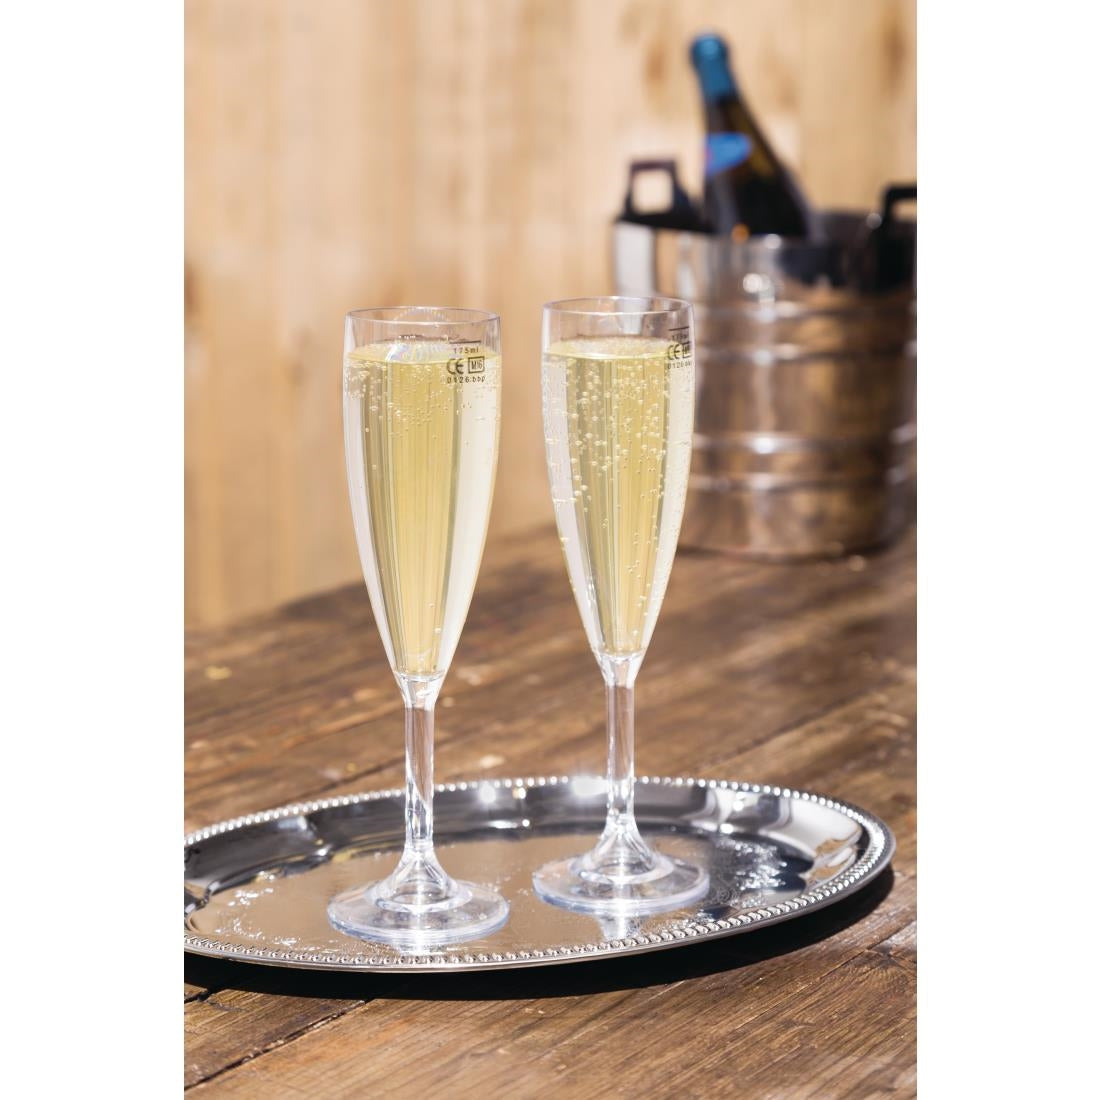 BBP Polycarbonate Champagne Flutes 200ml CE Marked at 175ml (Pack of 12) JD Catering Equipment Solutions Ltd